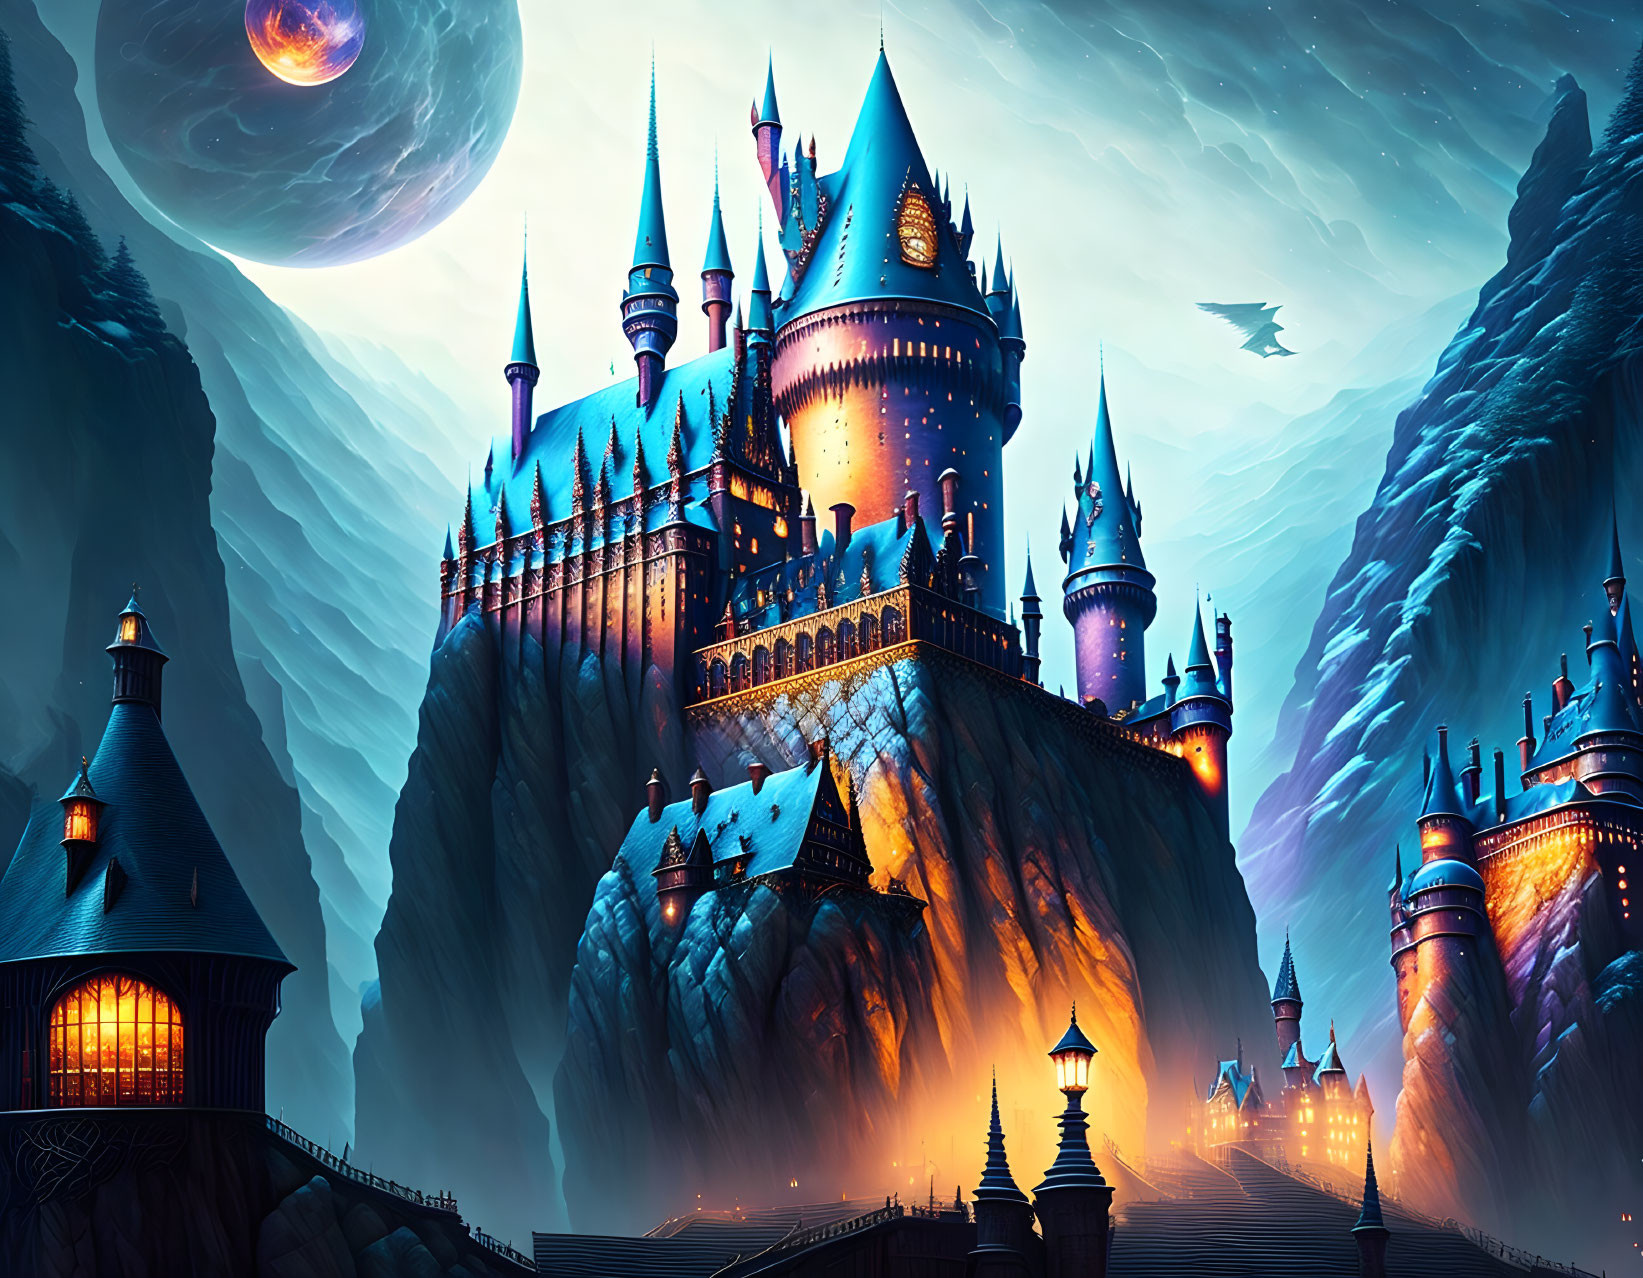 Enchanting twilight castle on cliffs with moon and flying creature